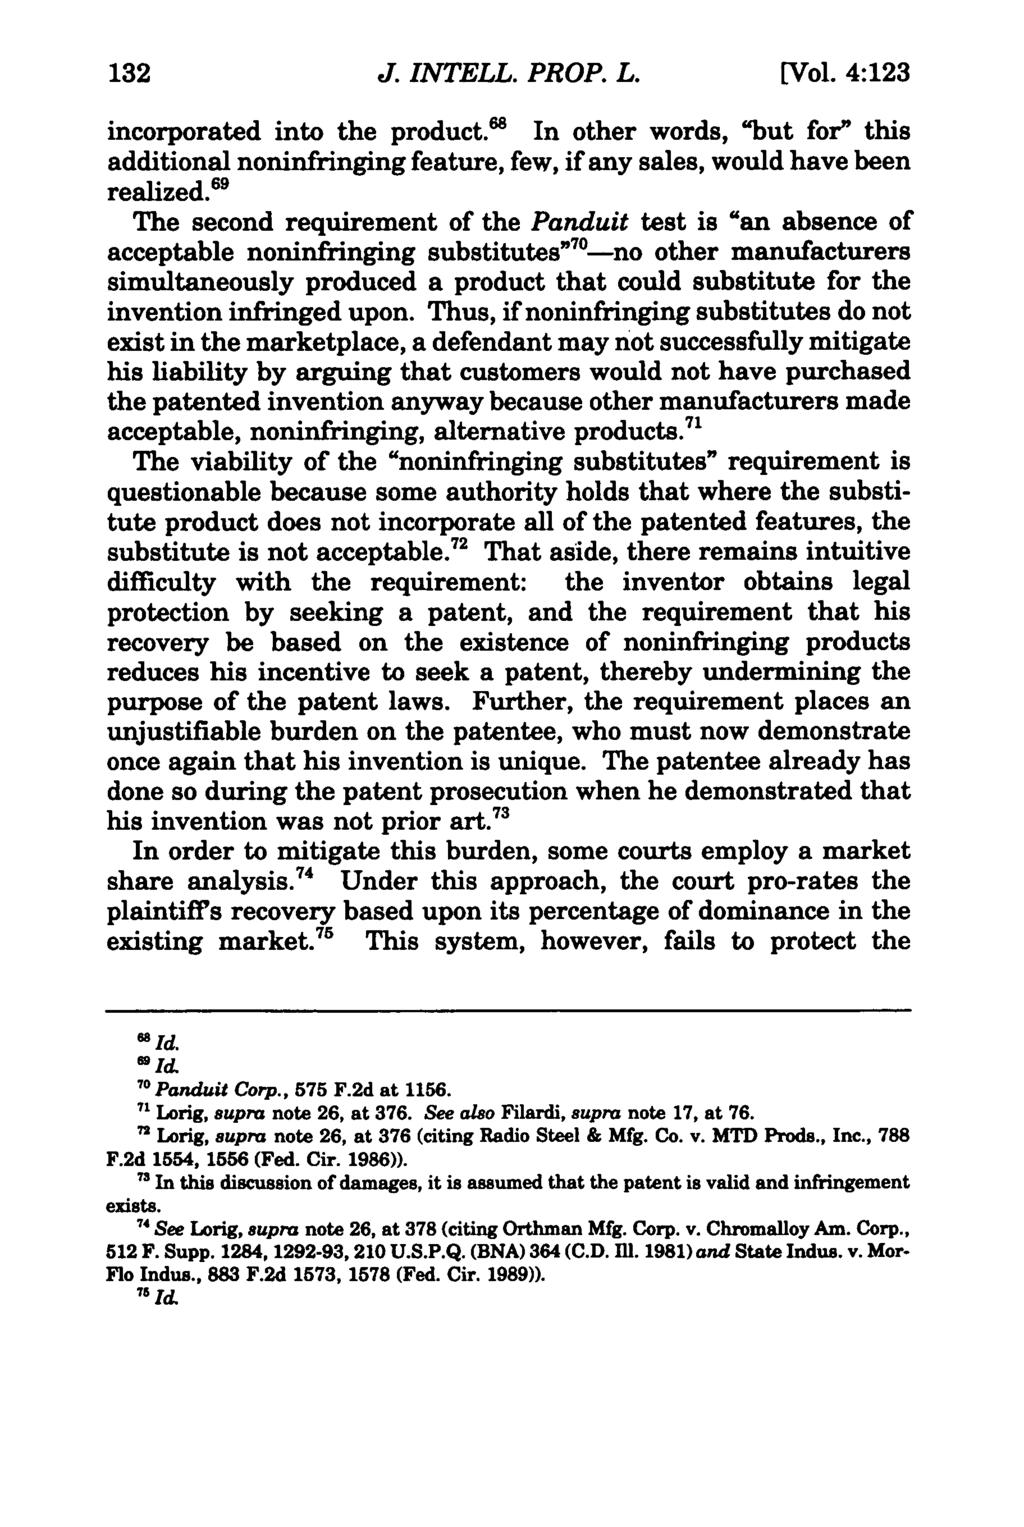 132 Journal of Intellectual Property Law, Vol. 4, Iss. 1 [1996], Art. 6 J. INTELL. PROP. L. [Vol. 4:123 incorporated into the product.